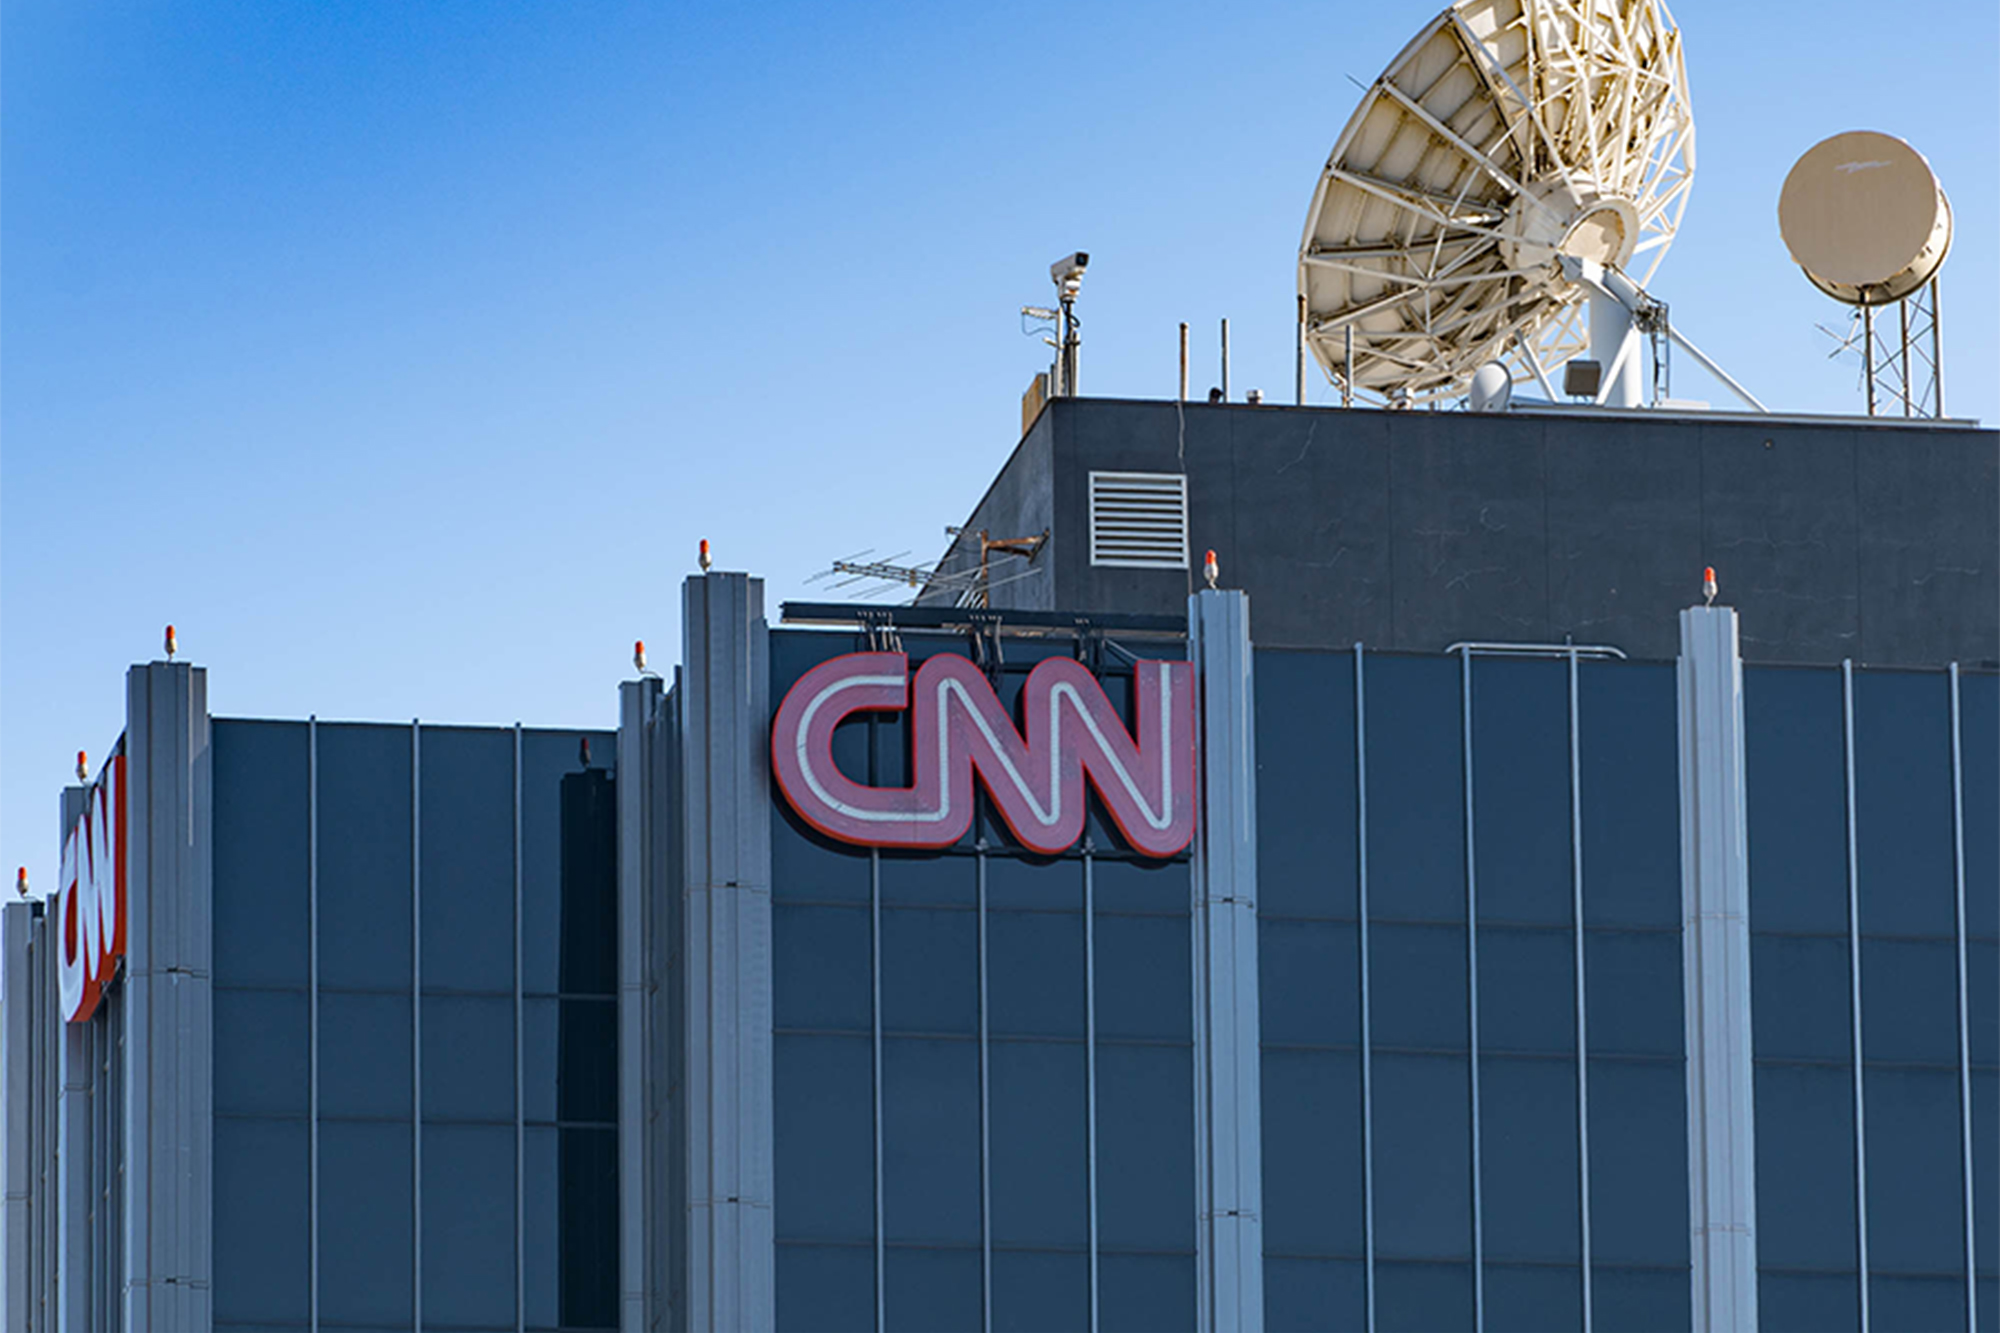 A second CNN producer is being investigated for a criminal offense involving possible minor victims